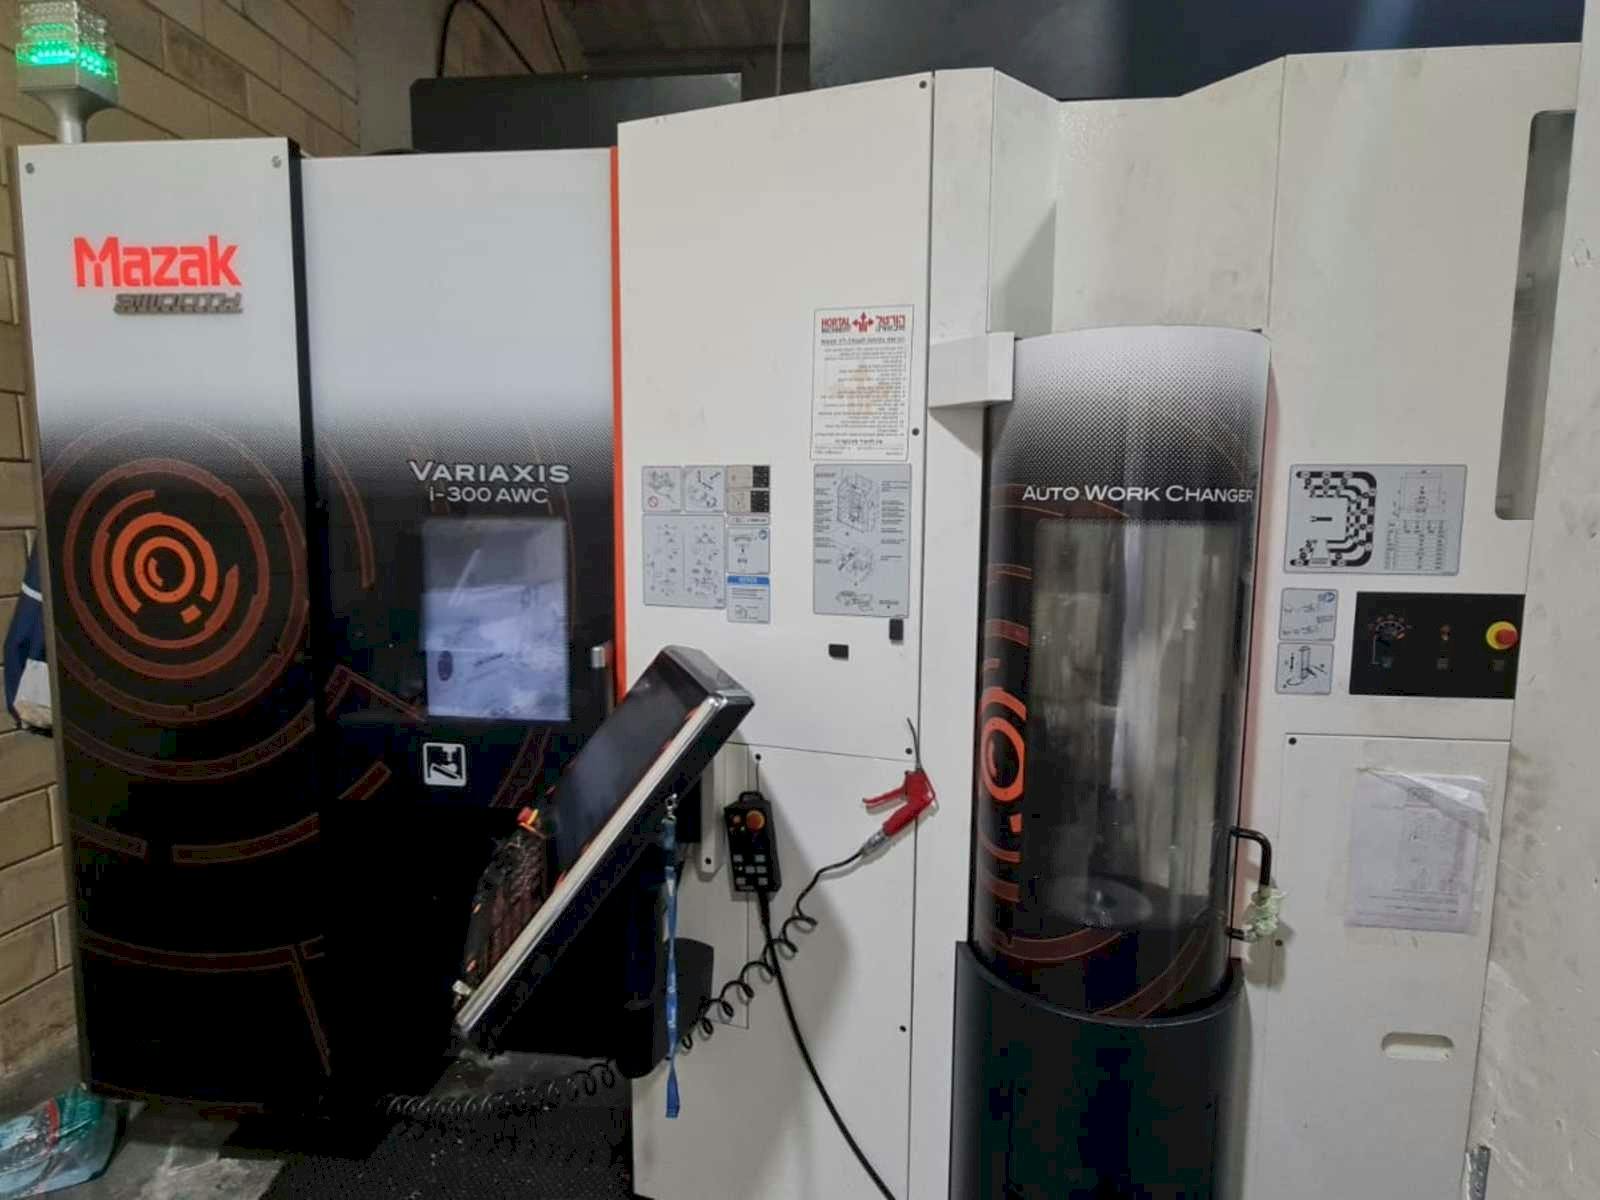 Front view of Mazak VARIAXIS I-300 AWC  machine